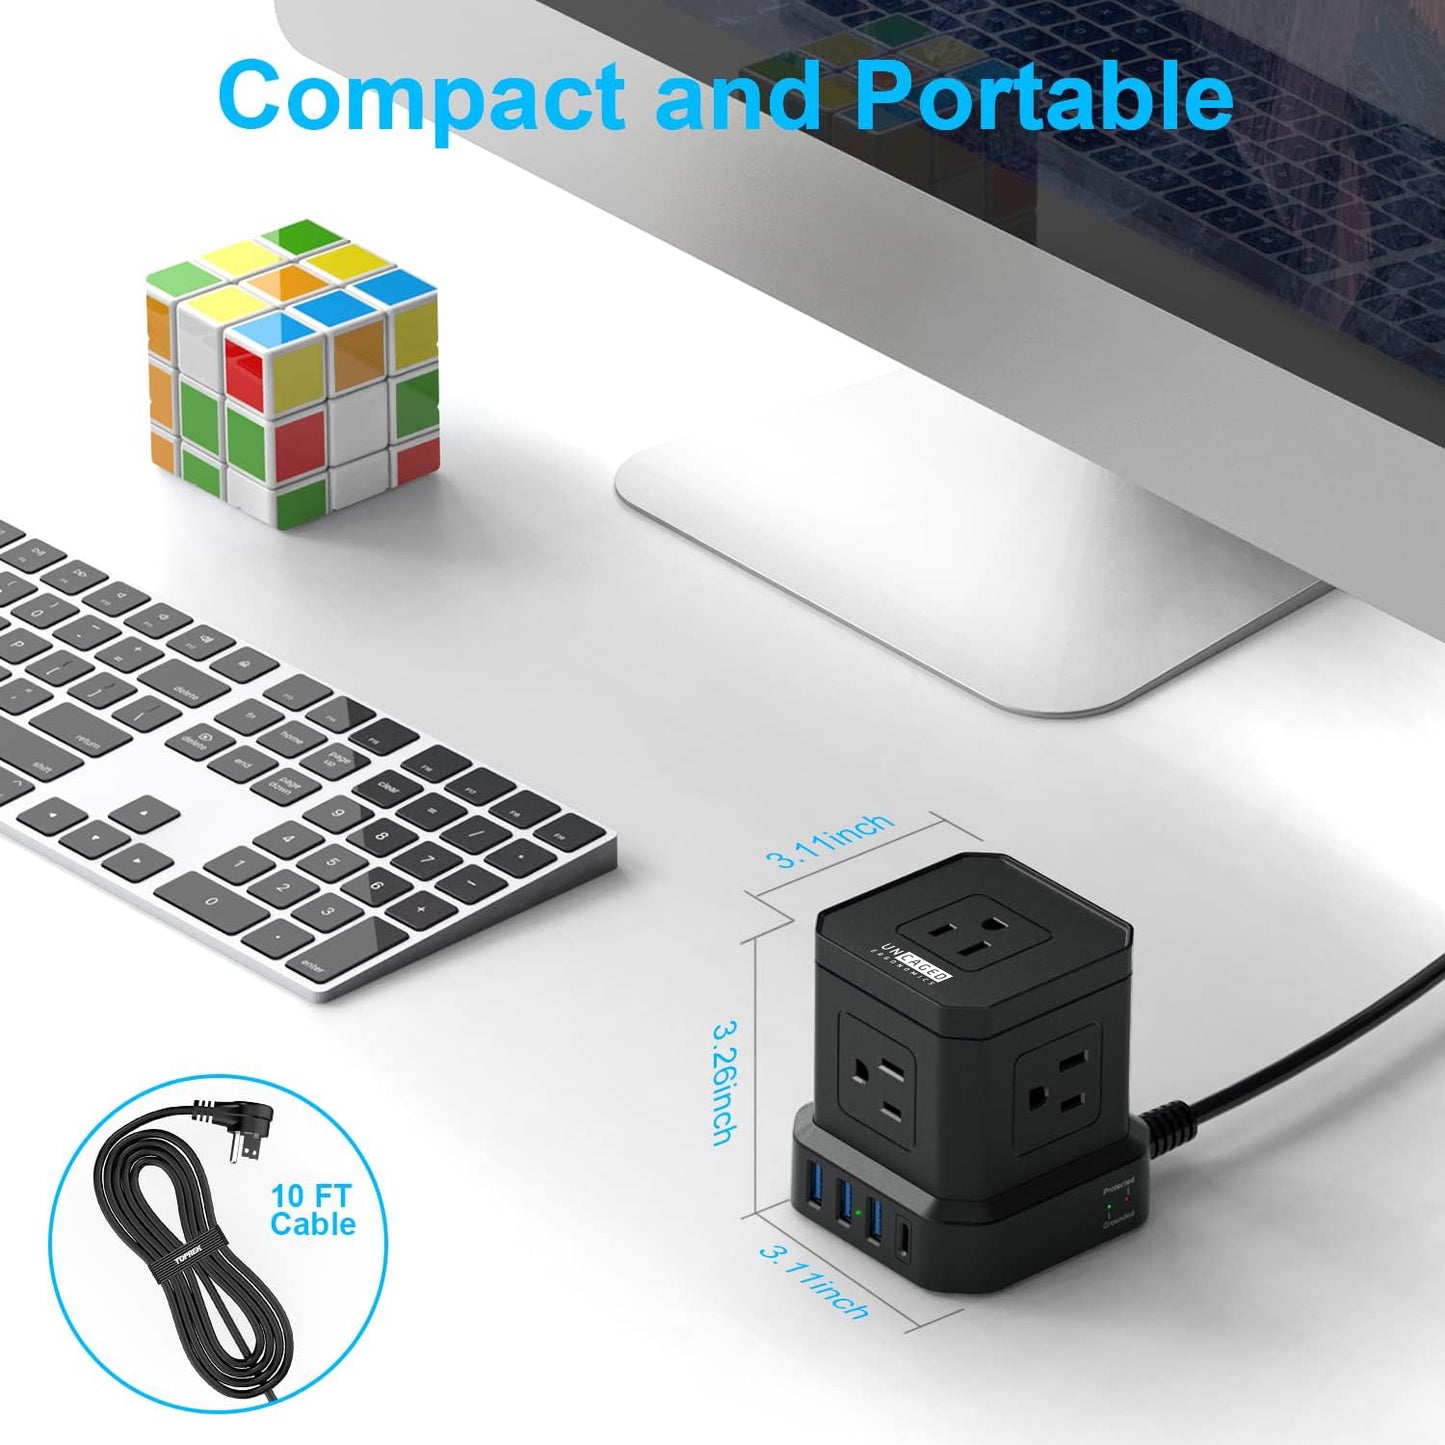 Cube Surge Protector Power Strip with USB Ports